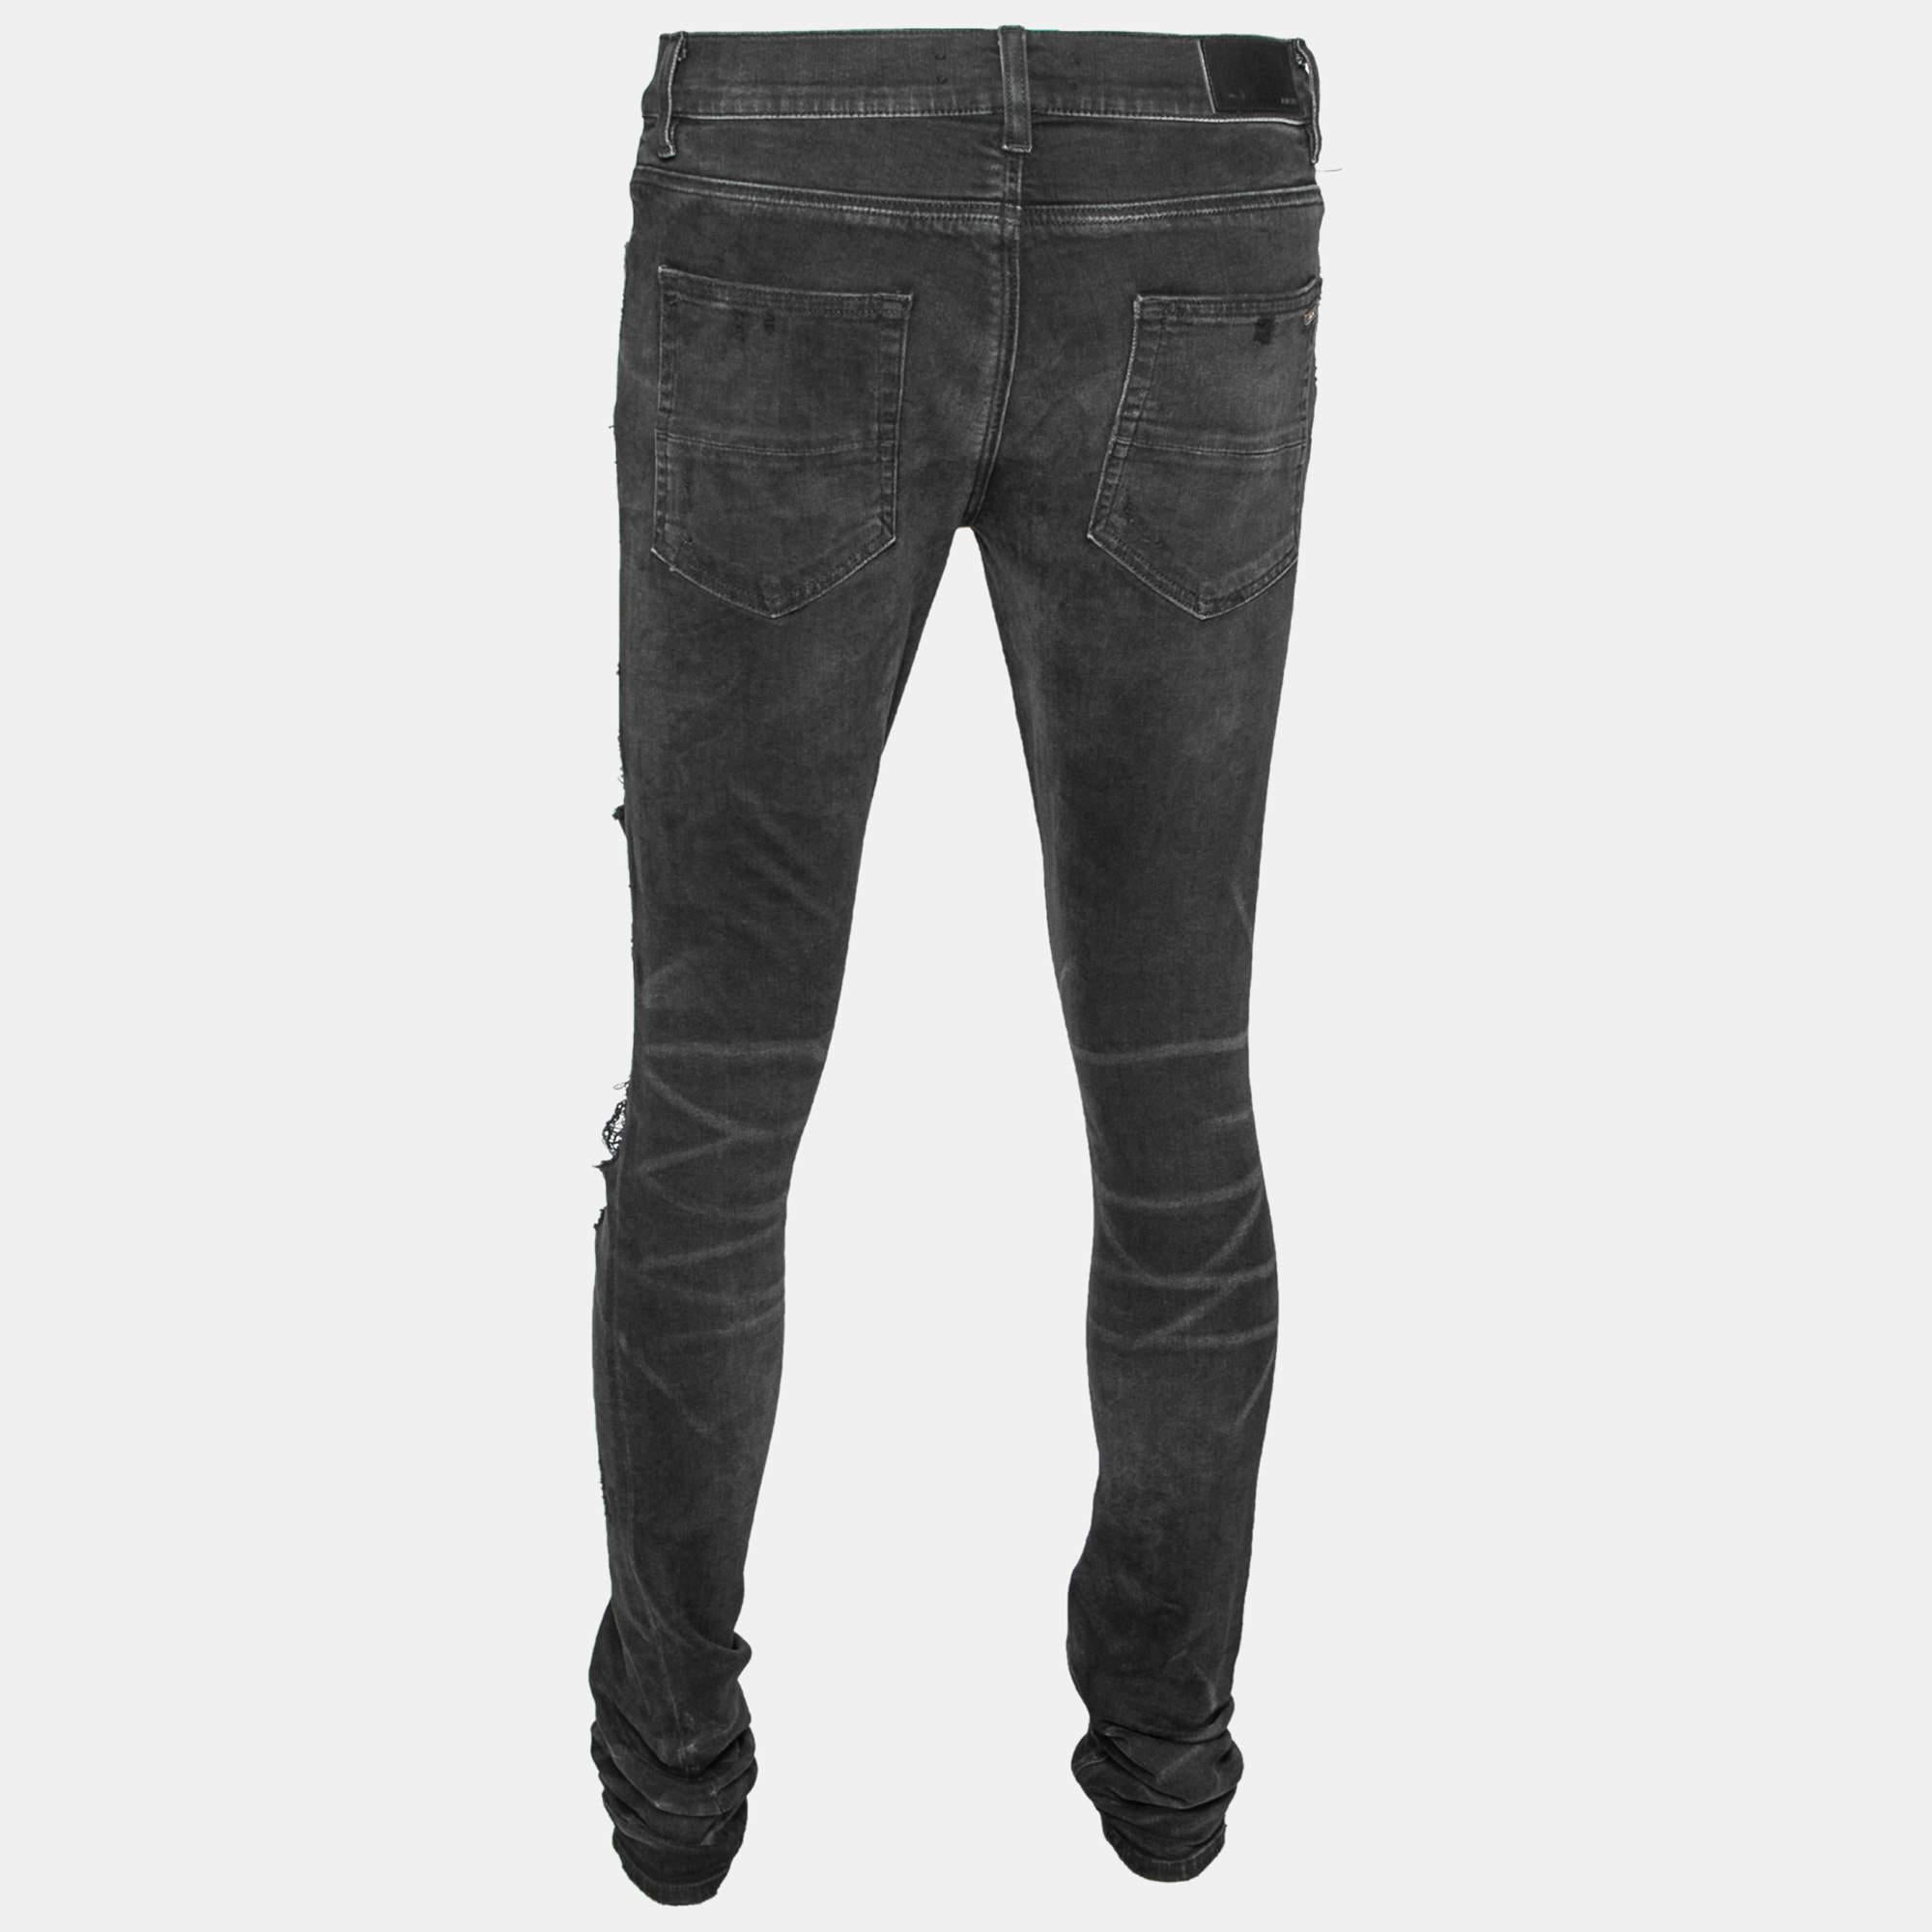 Revamp your wardrobe with these jeans from Amiri! They are created using black cotton fabric, which is enriched with distressed detailing. The jeans are made in a slim-fit style and are provided with a buttoned closure and external pockets.

